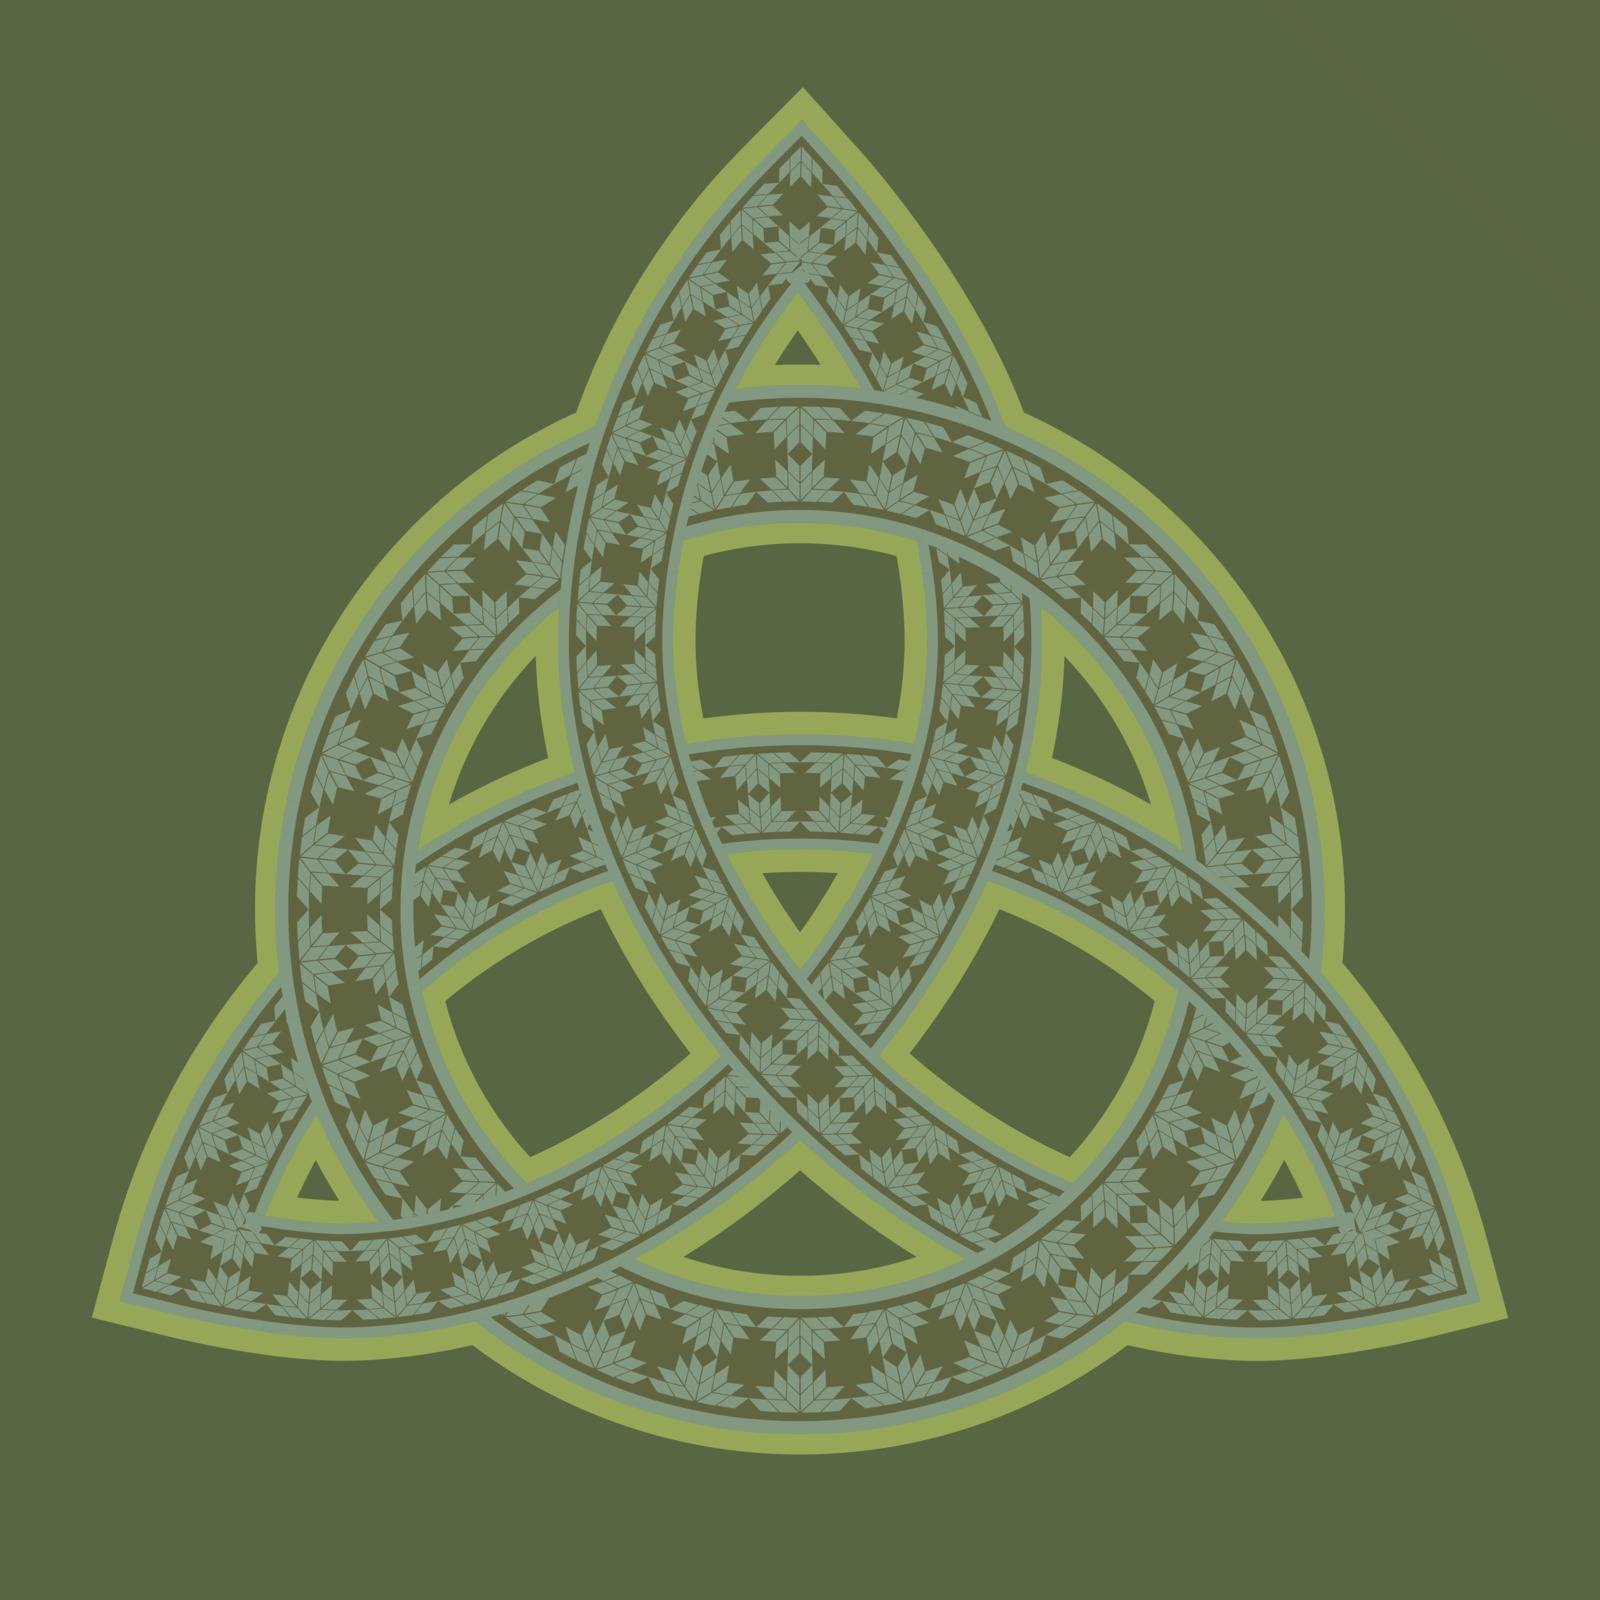 Floral ornamented celtic pagan symbol triquetra on olive green background